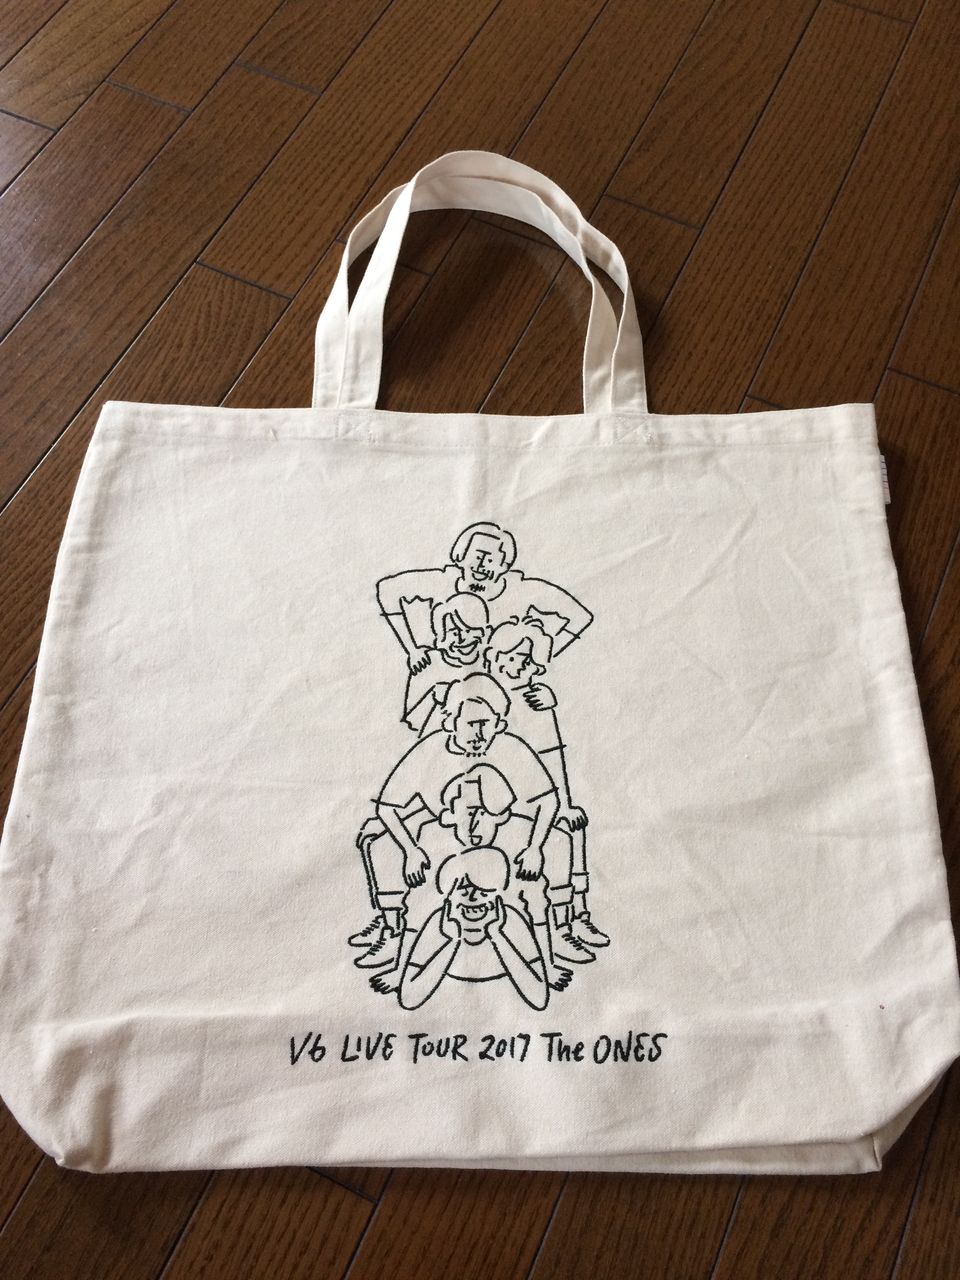 V6 LIVE TOUR 2017 The ONES グッズ2 : IーD iary